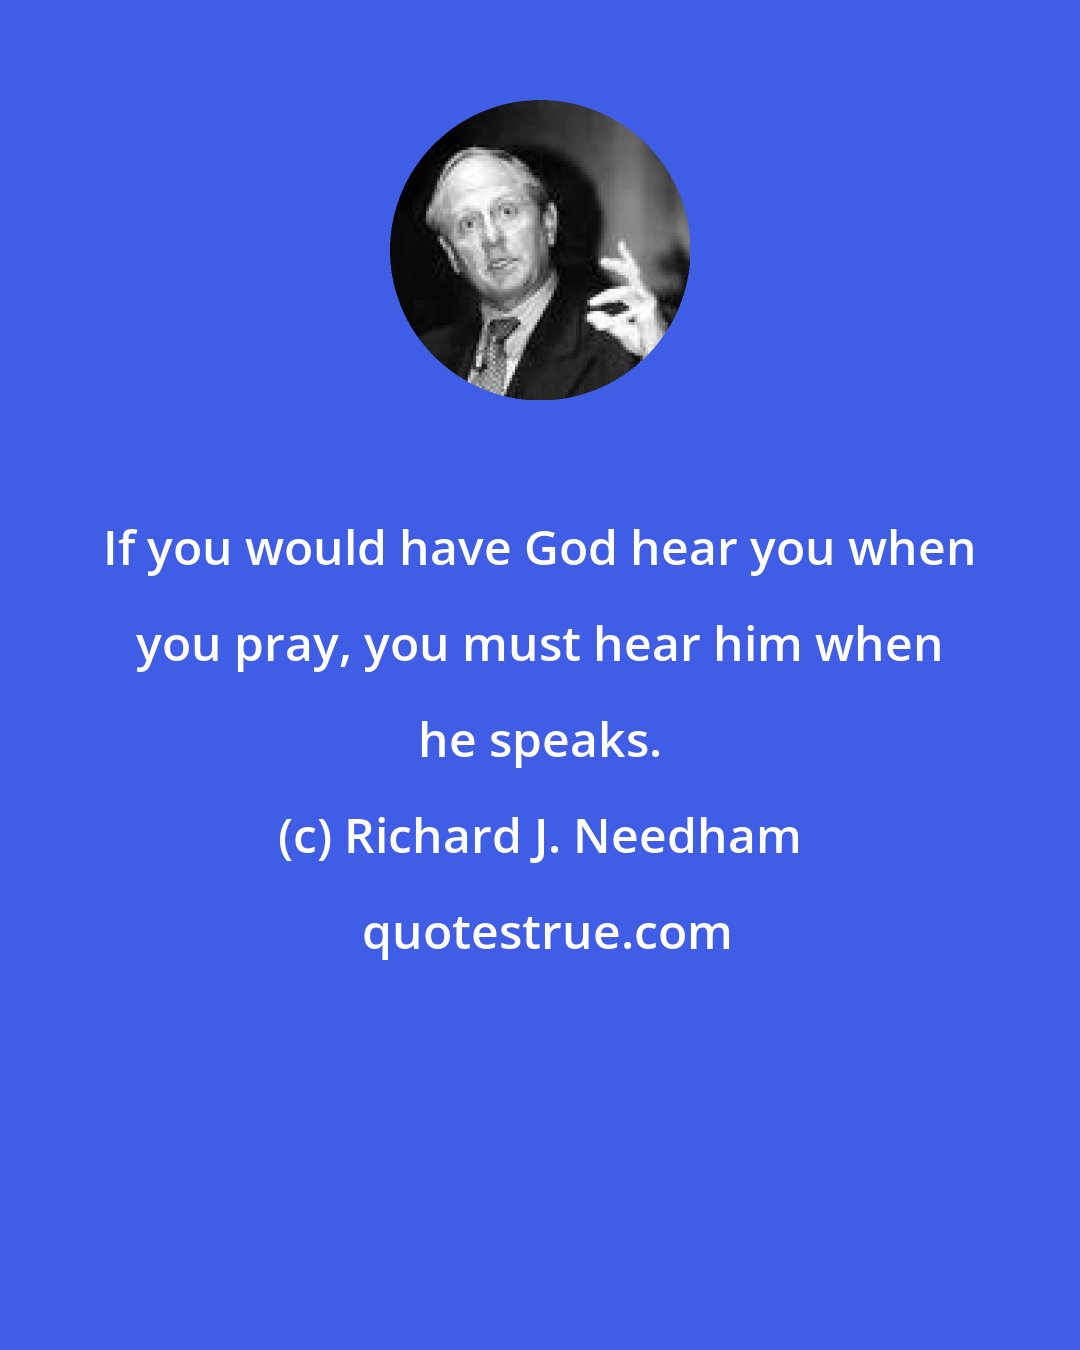 Richard J. Needham: If you would have God hear you when you pray, you must hear him when he speaks.